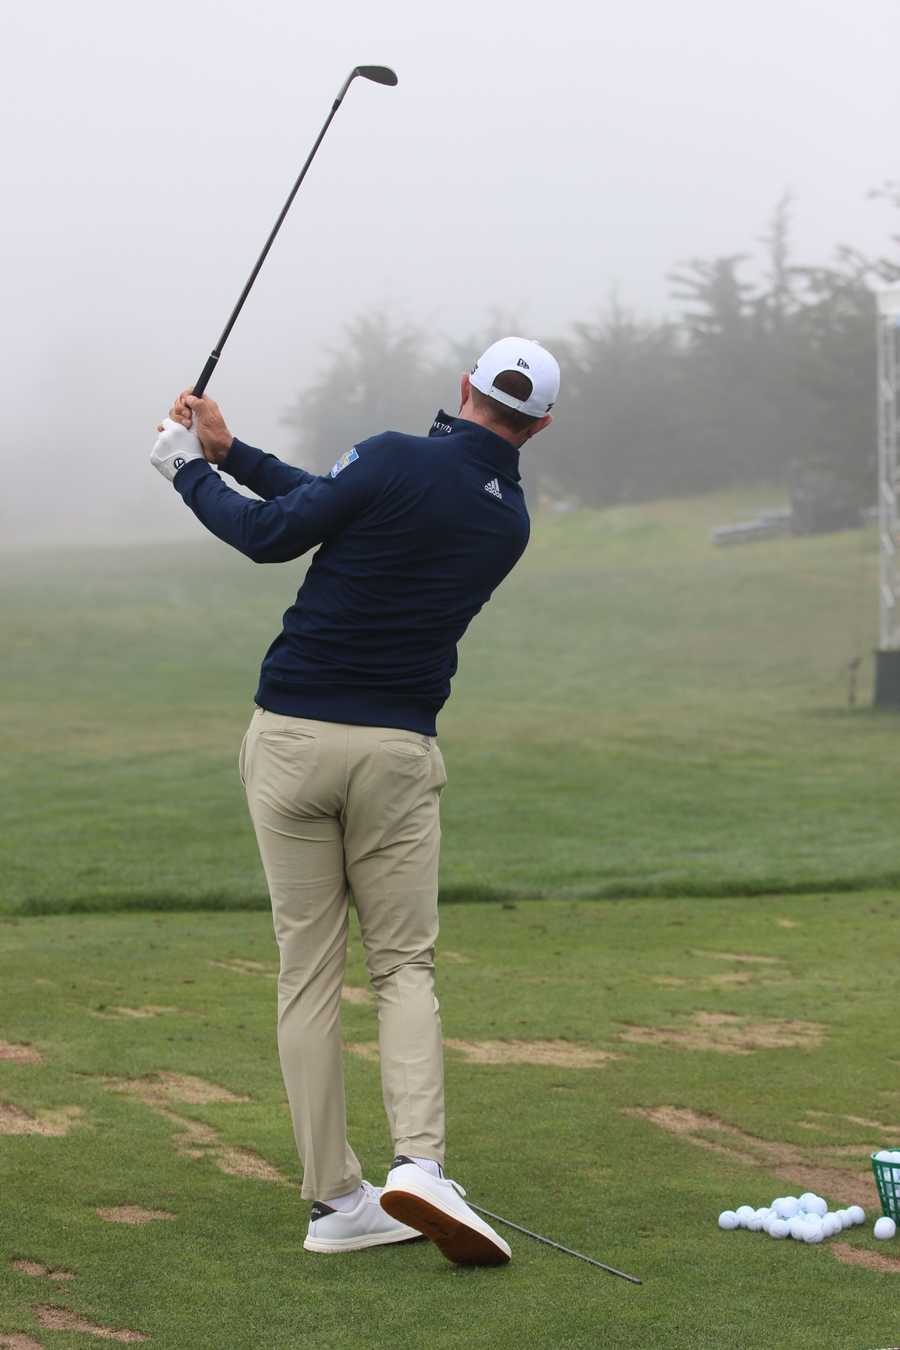 Gallery: 119th U.S. Open at Pebble Beach Practice Rounds